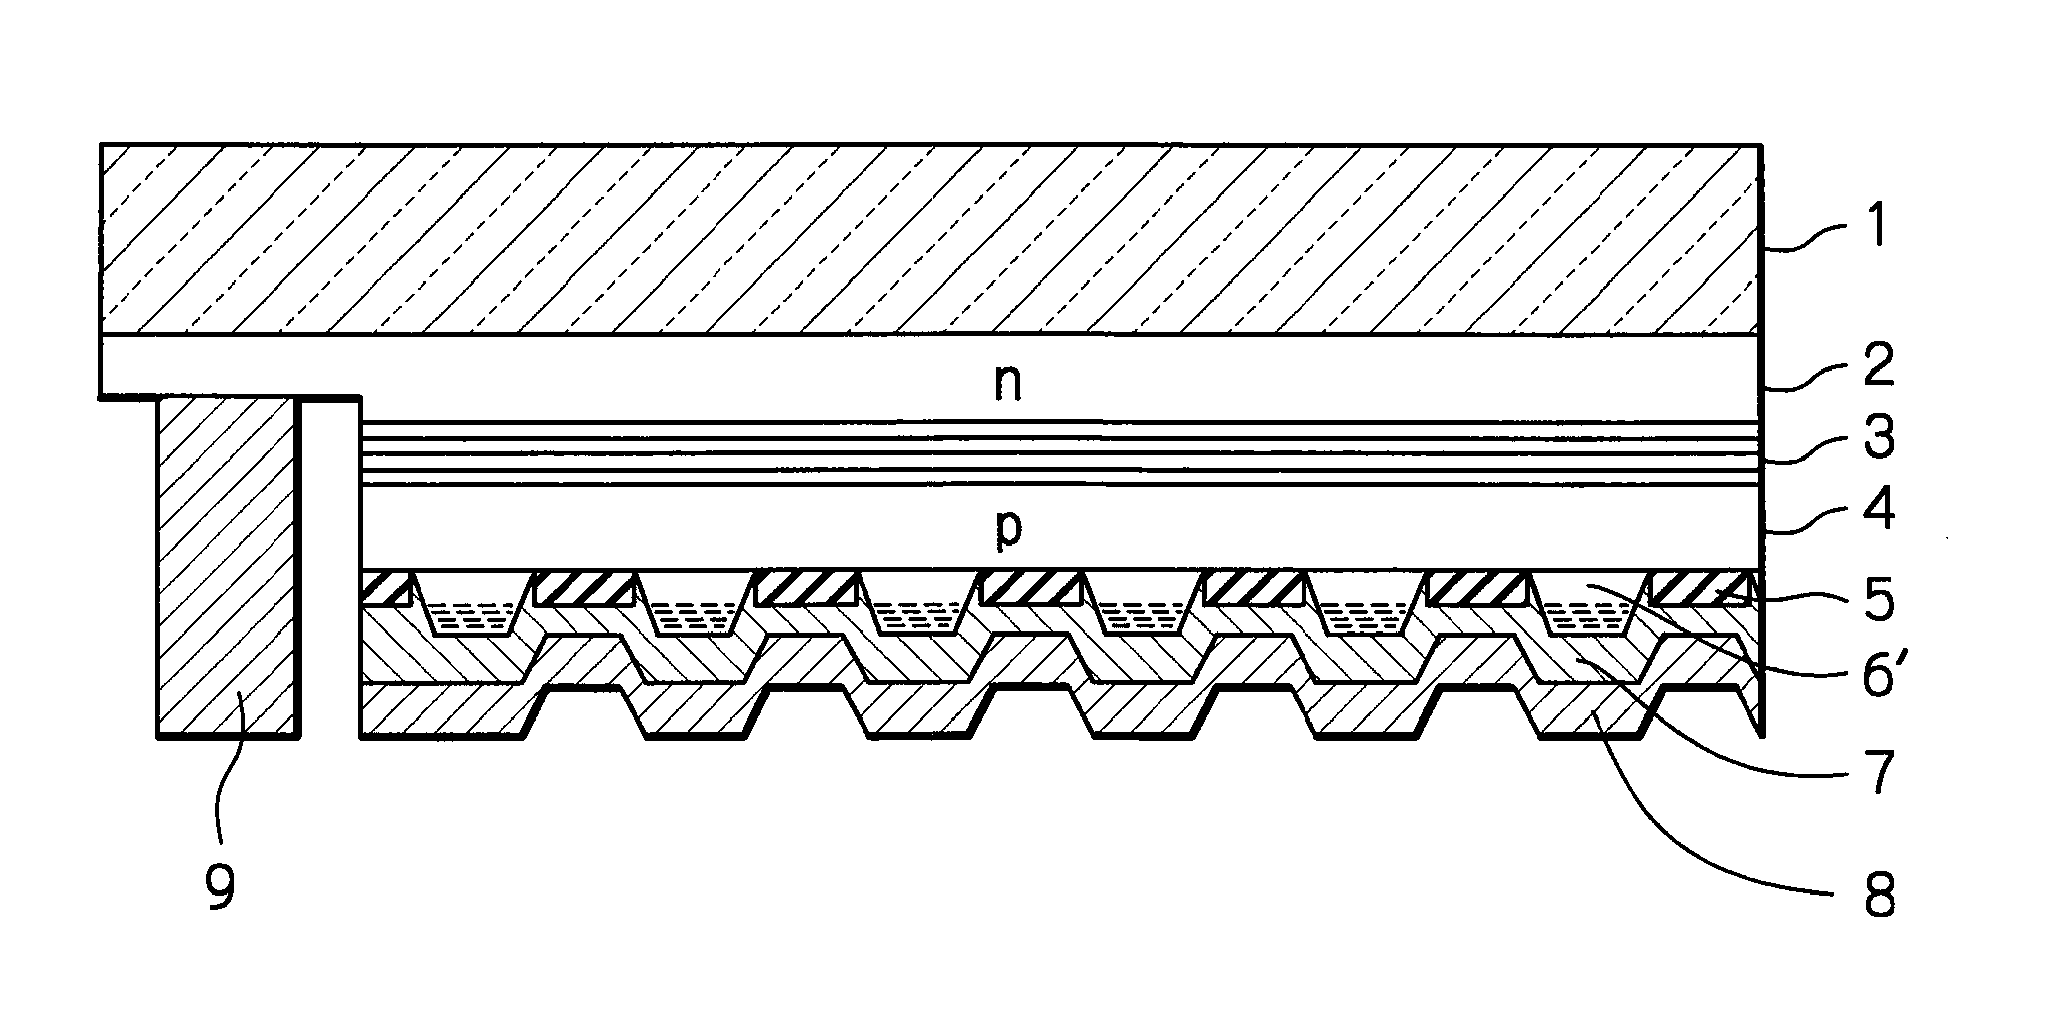 Optical semiconductor device having uneven semiconductor layer with non-uniform carrier density